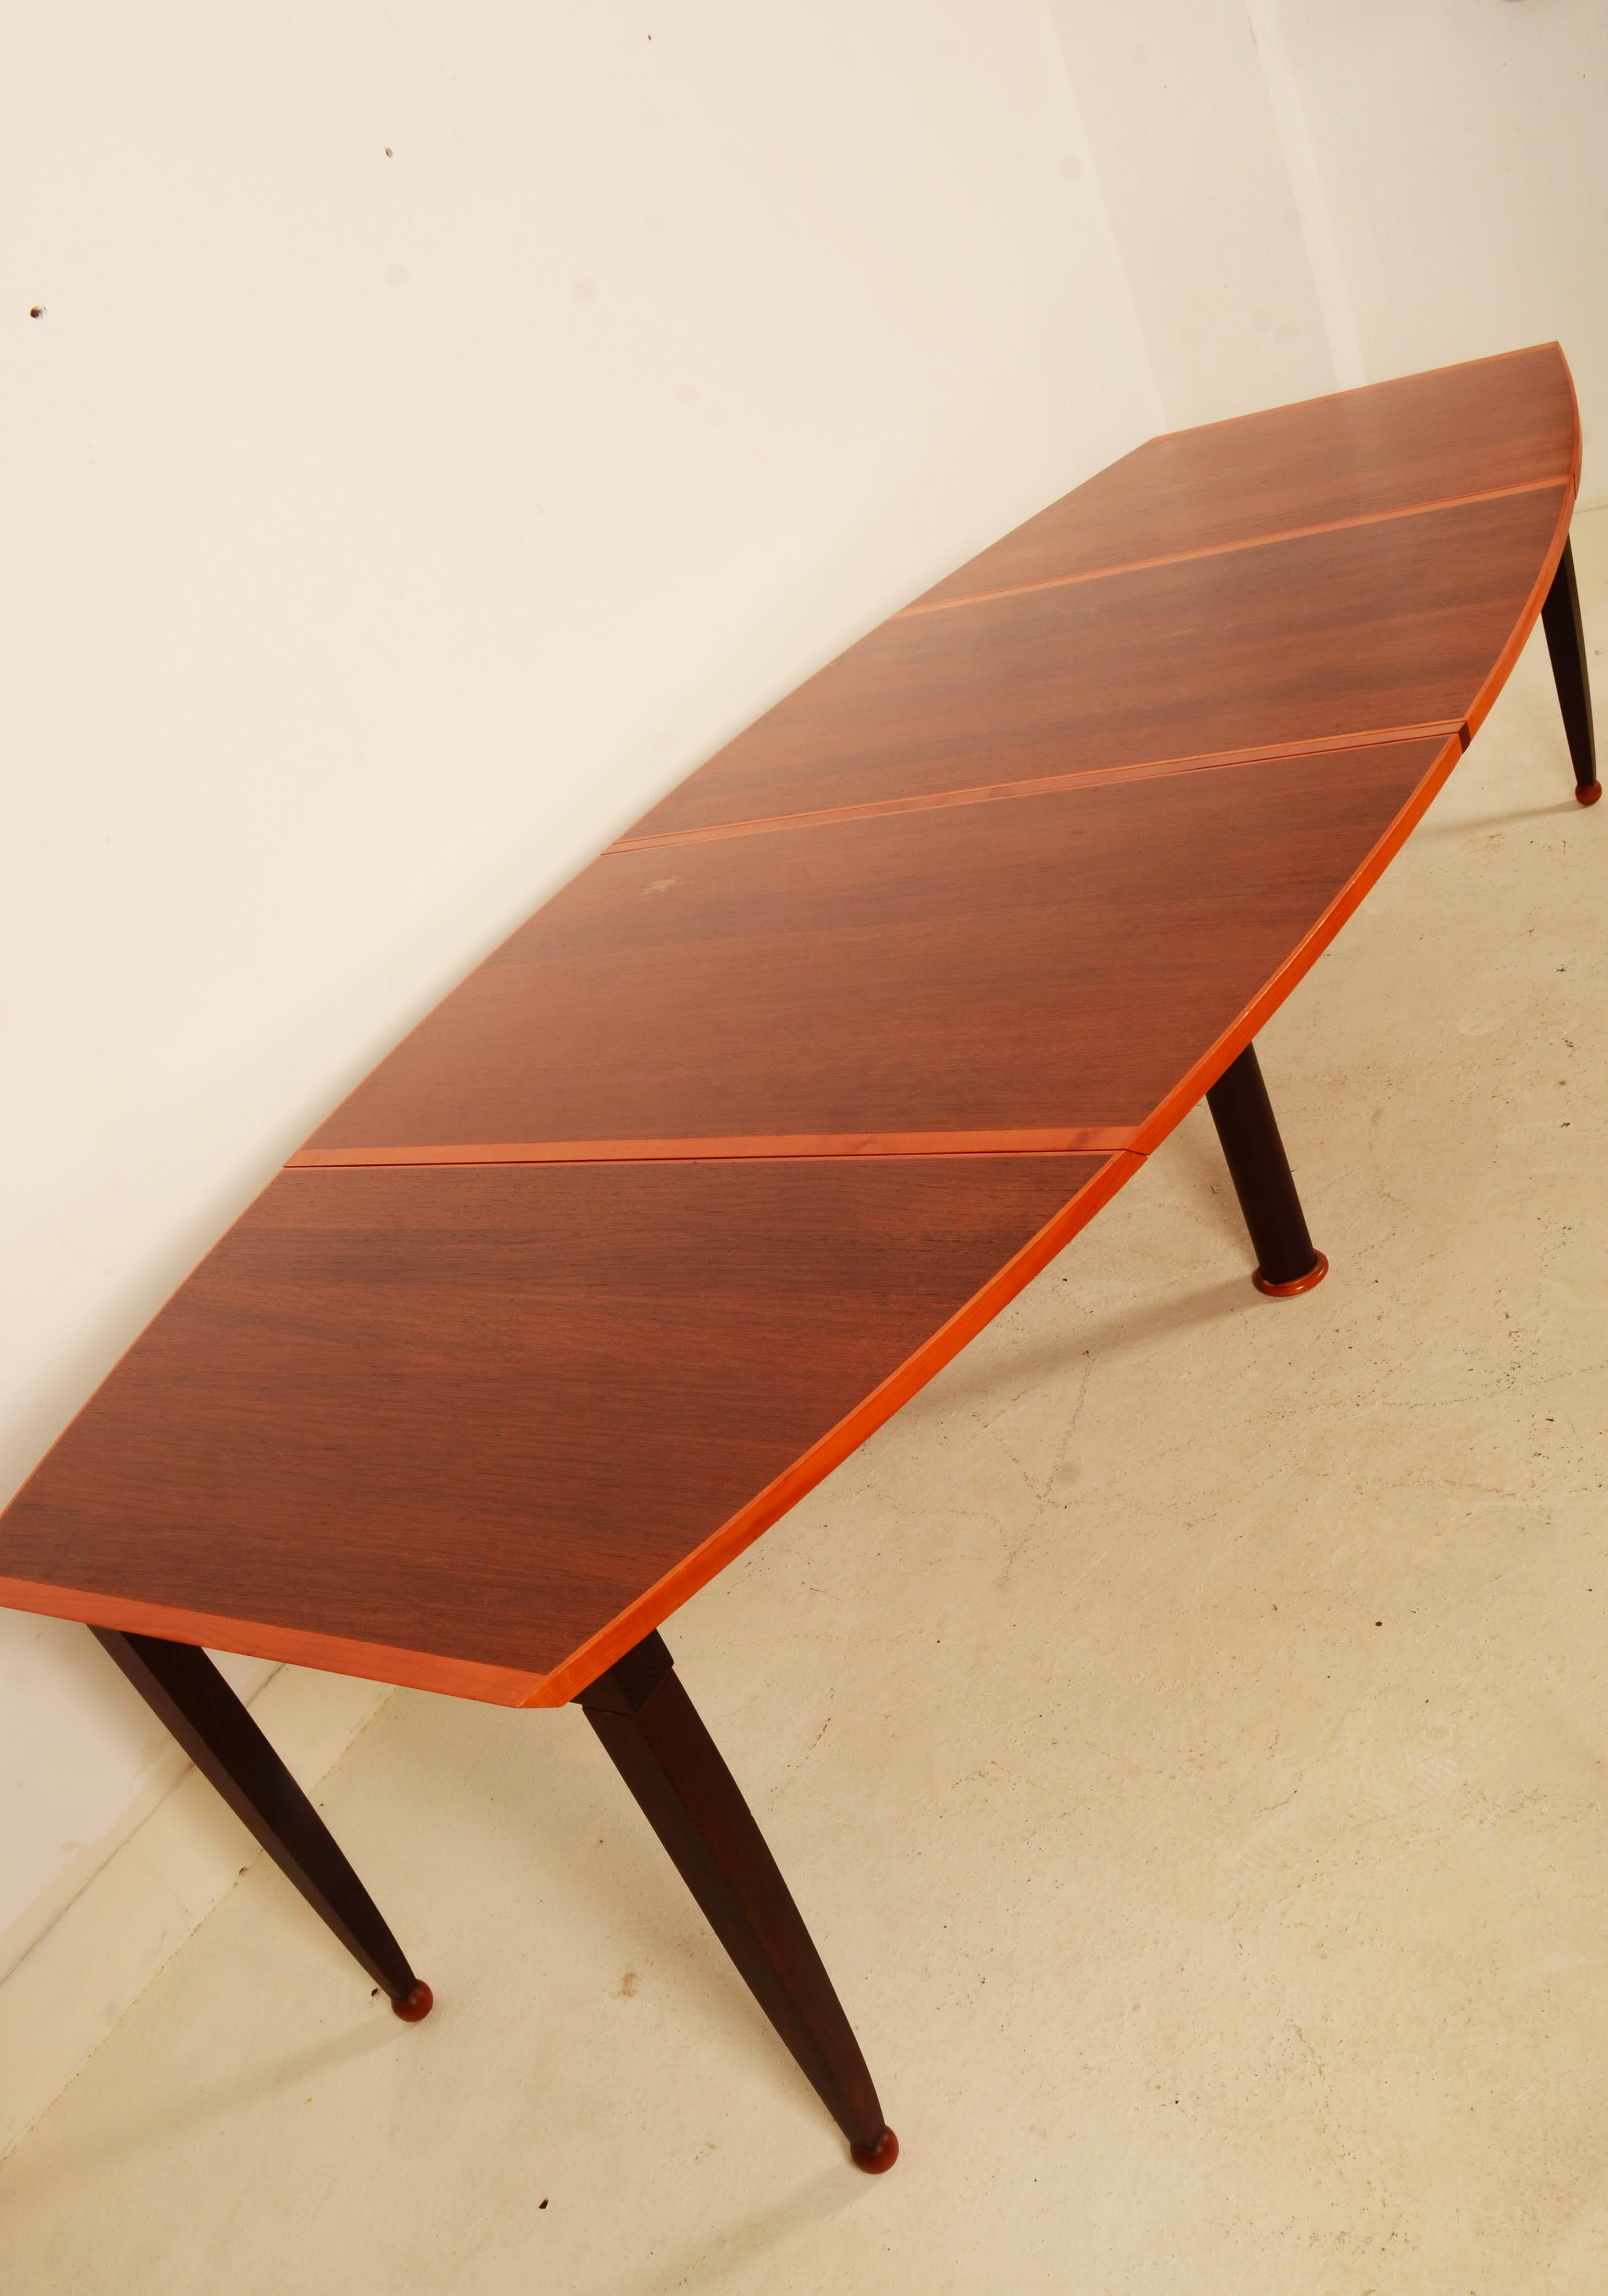 Tabula Magna Dining Table by Oscar Tosquets Blanca for Driade Aleph  For Sale 8